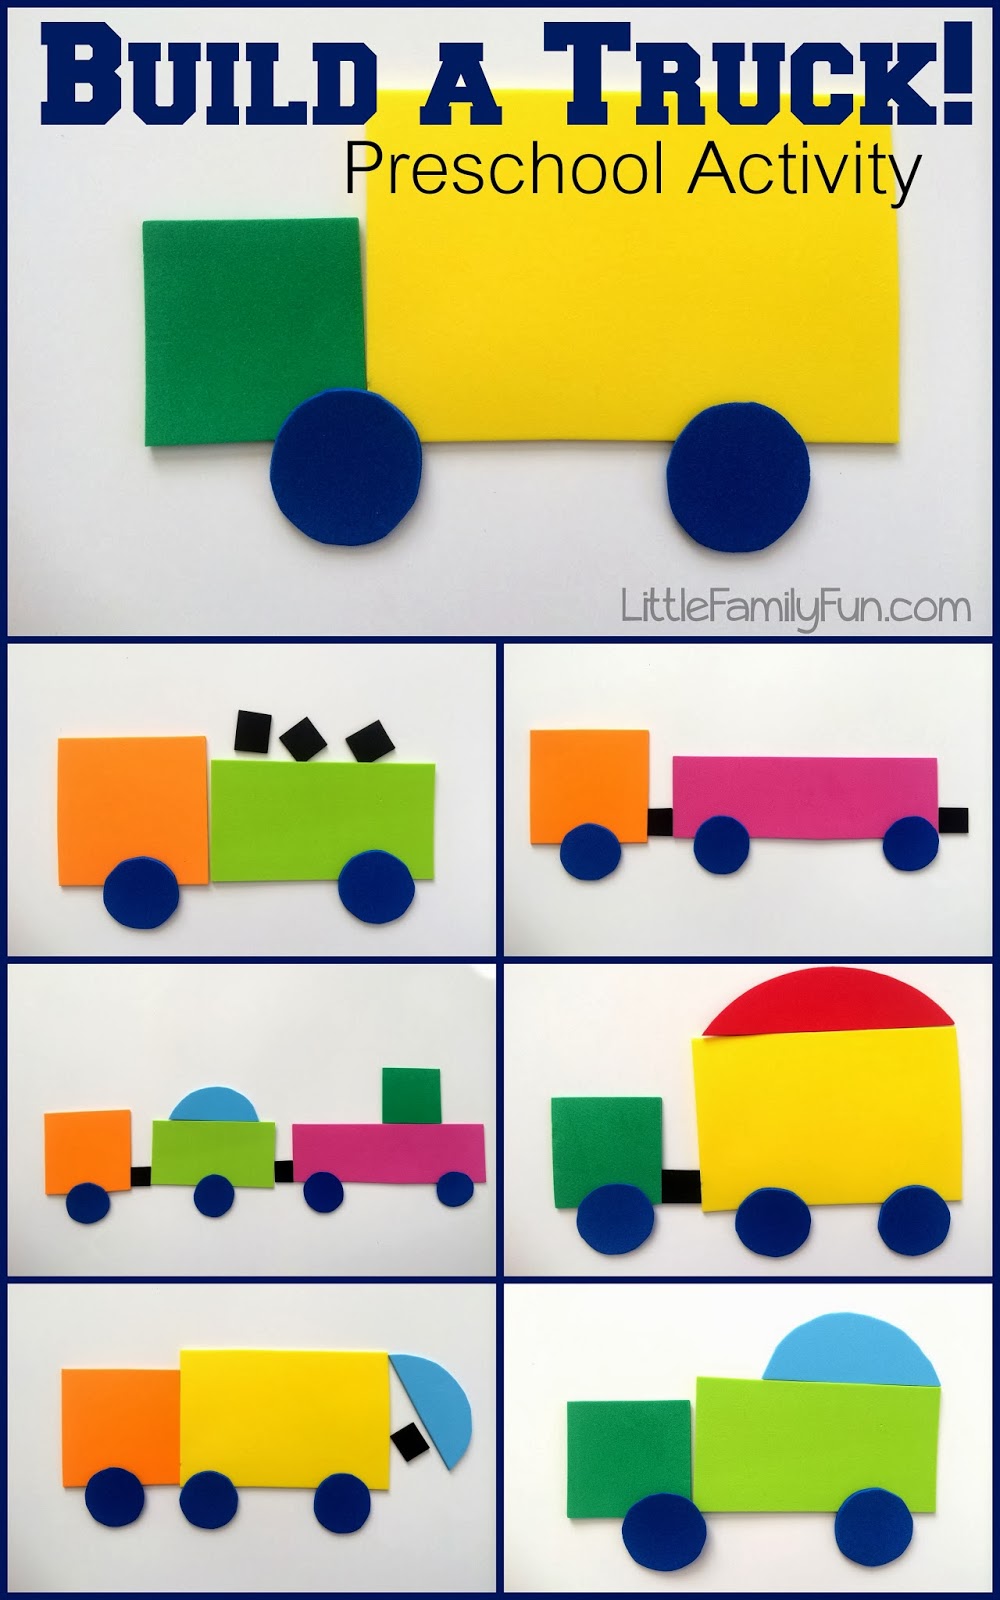 Free Construction And Building Themed Printables And Crafts